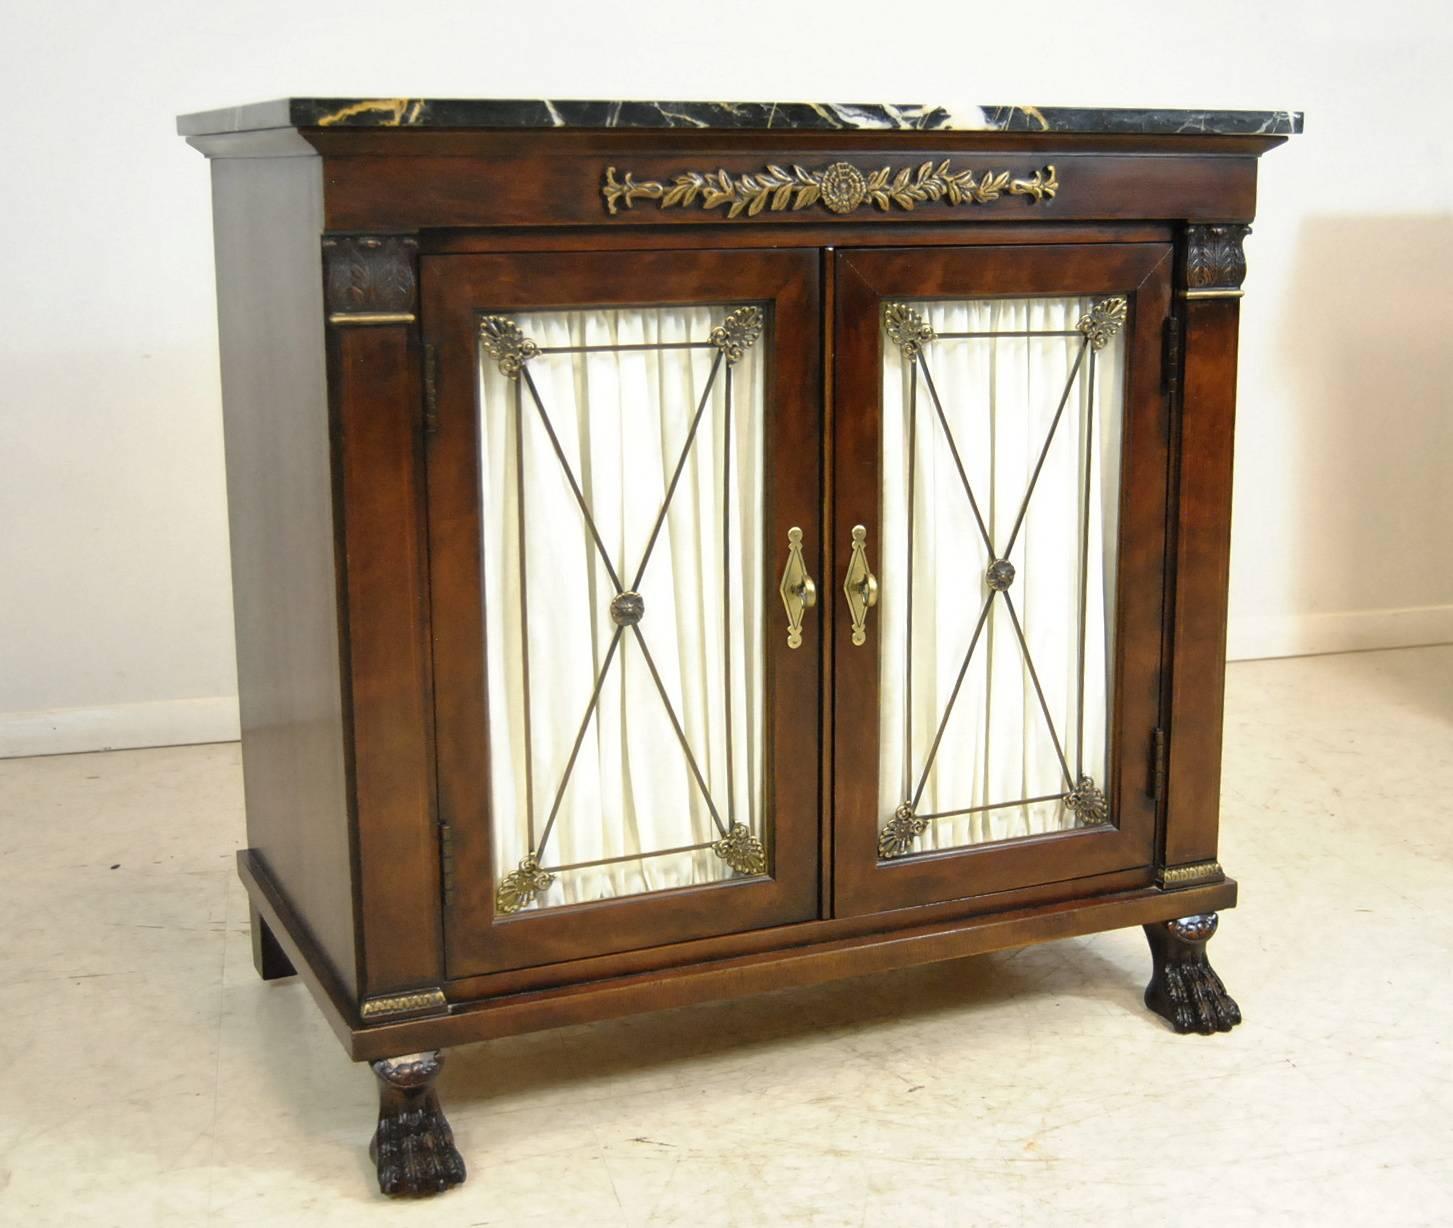 A beautiful pair of marble top double door Empire style cabinets by Henredon. These are the New St Laurent cabinets and feature a distressed dark walnut finish with applied carvings at front top. Double doors have decorative metal inserts which are